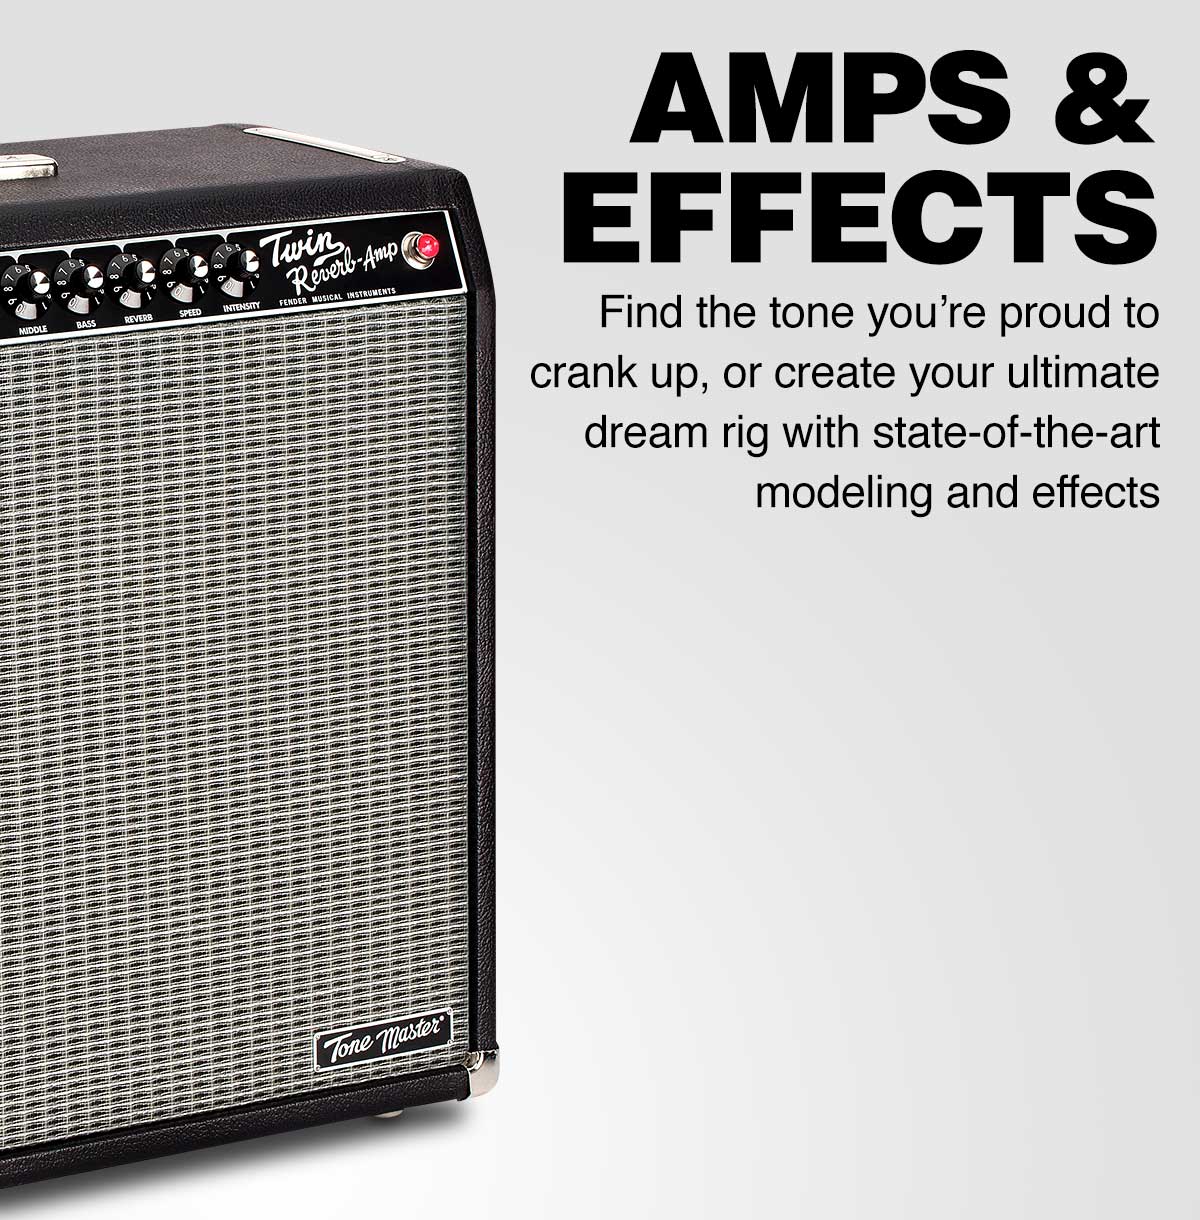 Amps and Effects. Find the tone you're proud to crank up, or create your ultimate dream rig with state-of-the-art modeling and effects